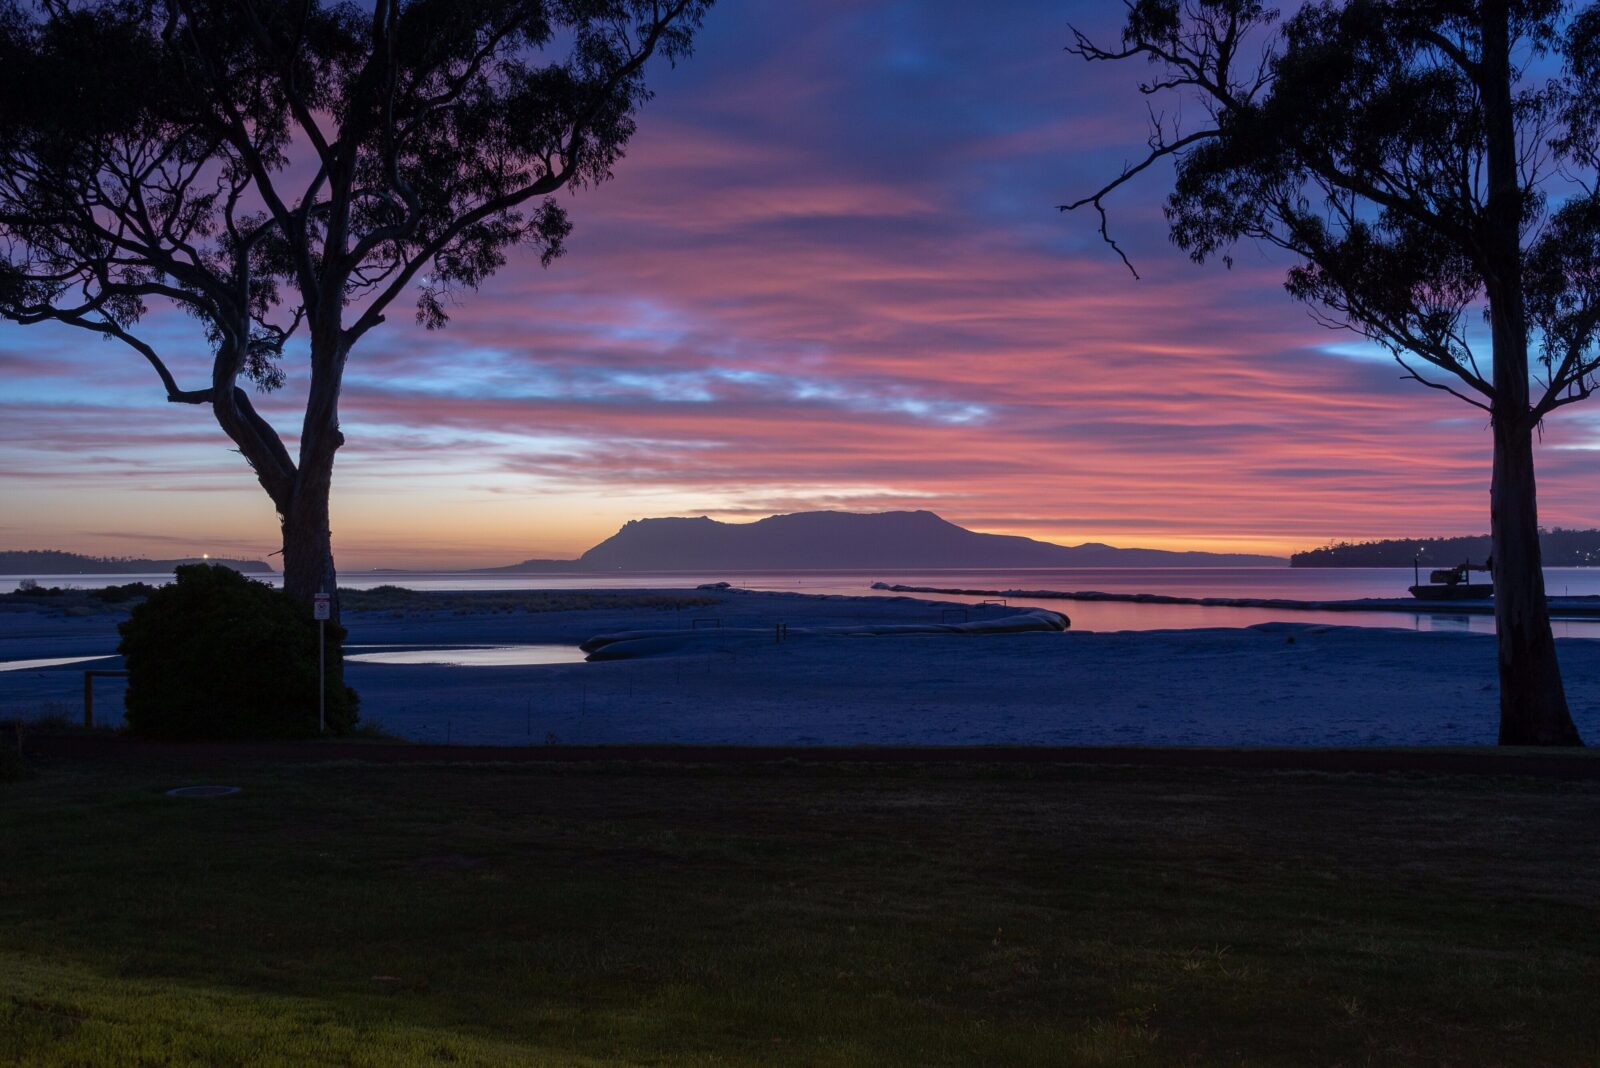 Lyenna: Sunrise over Maria Island viewed from the house